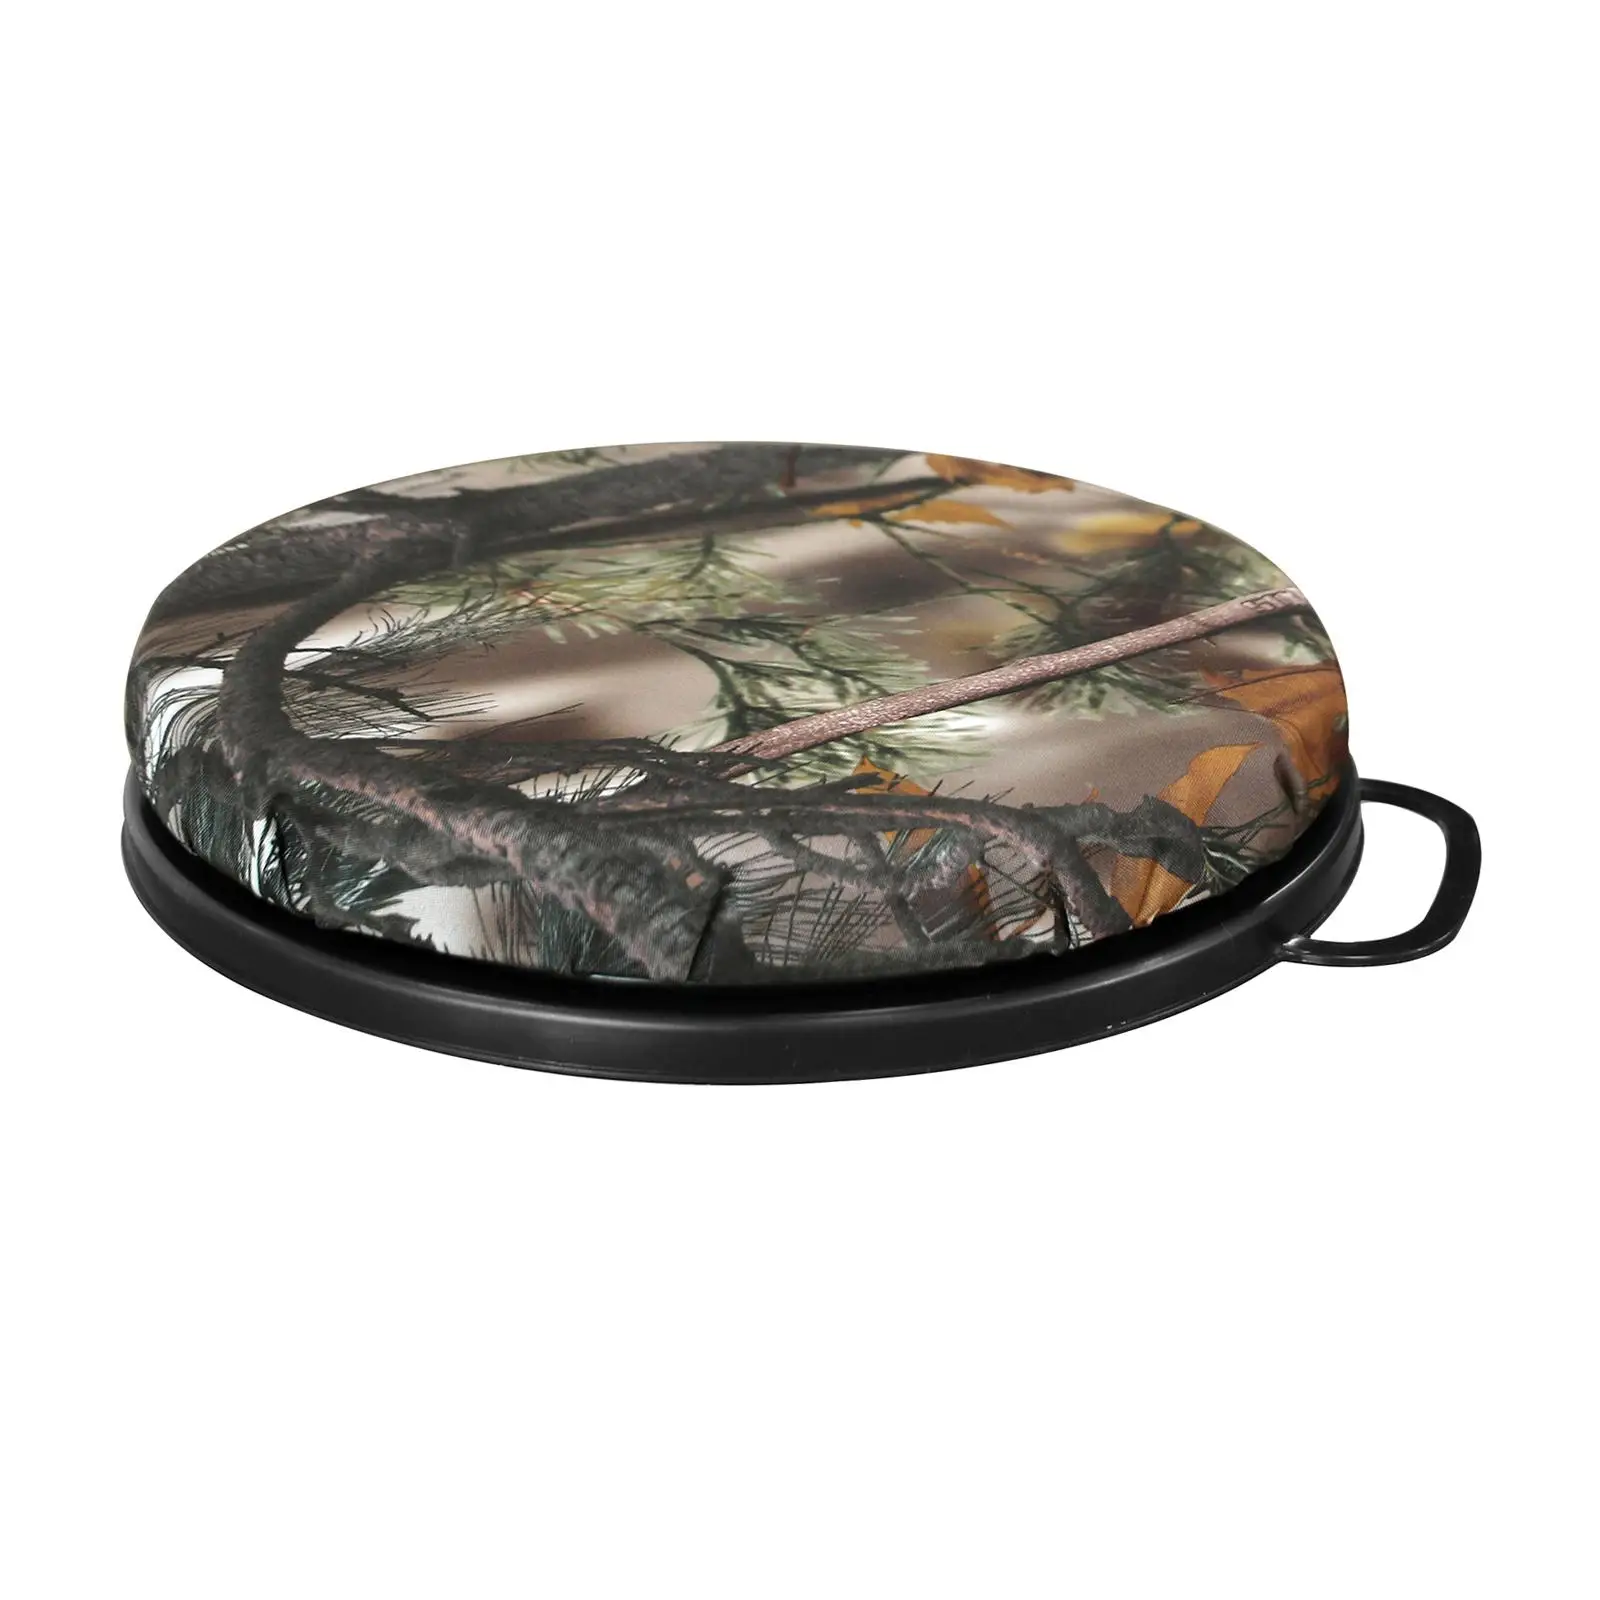 Hunting Seat Cushion Thickened with Handle Oxford Cloth 5 Gallons Bucket Mat for